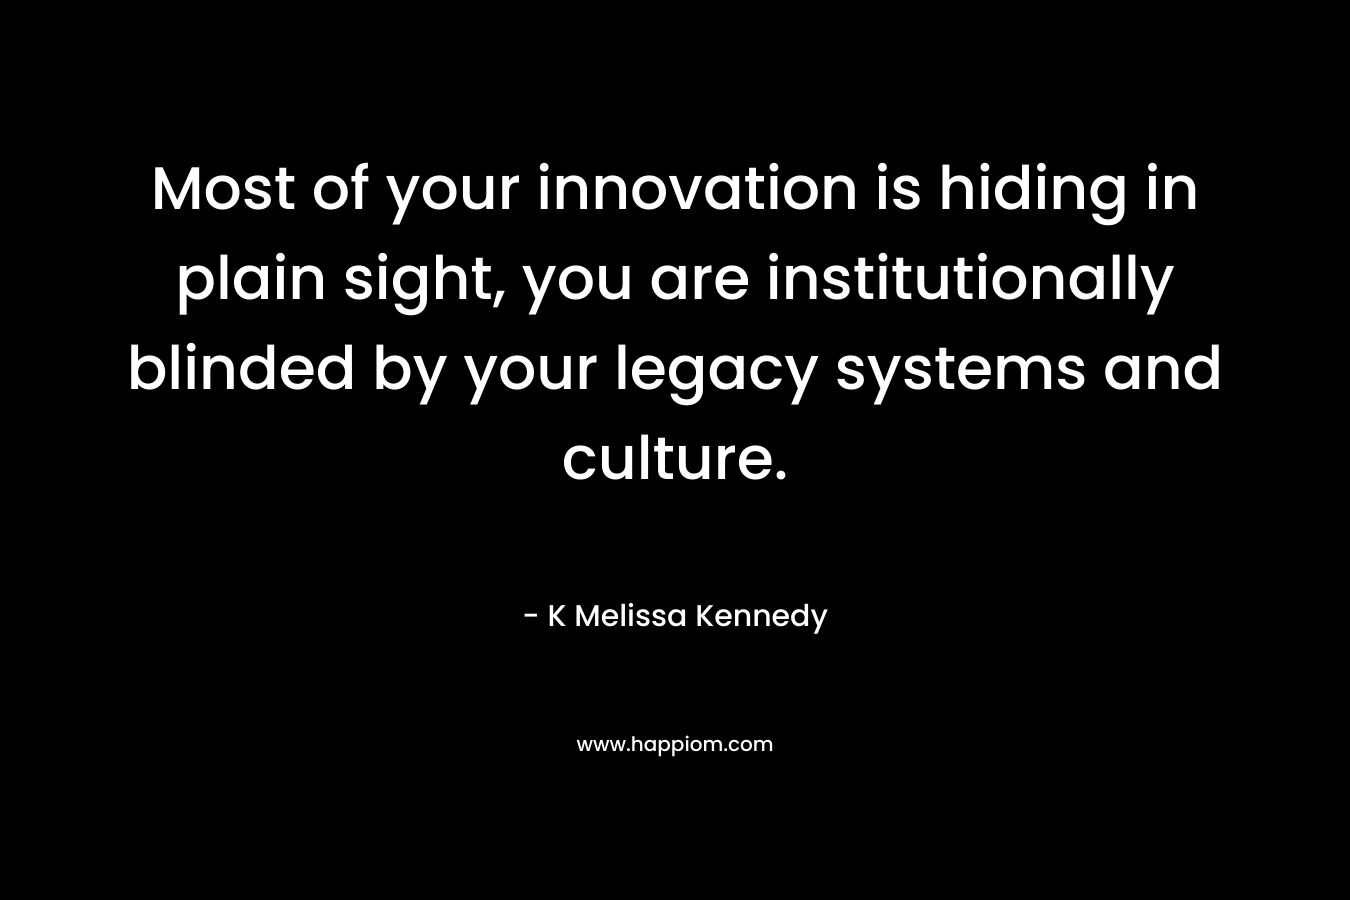 Most of your innovation is hiding in plain sight, you are institutionally blinded by your legacy systems and culture.